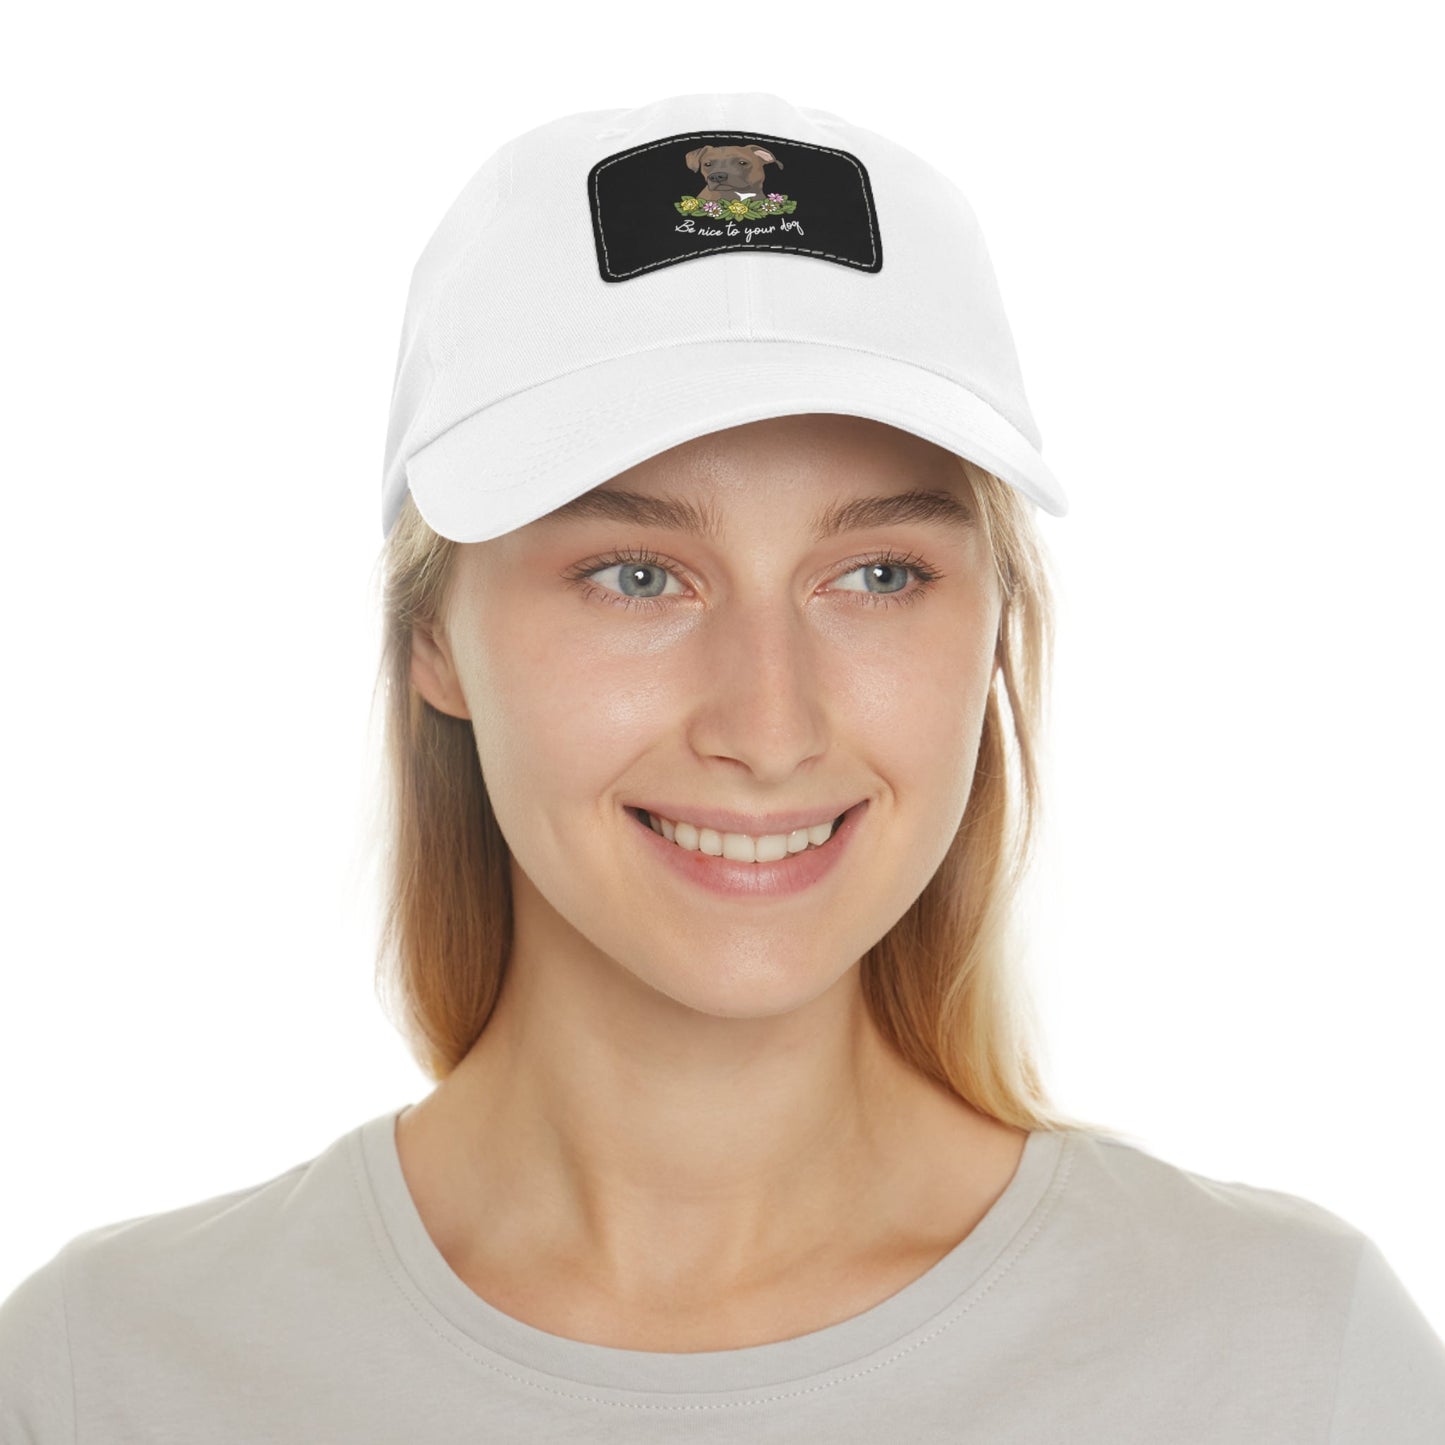 Be Nice to Your Dog | Dad Hat - Detezi Designs-92020007684532985755